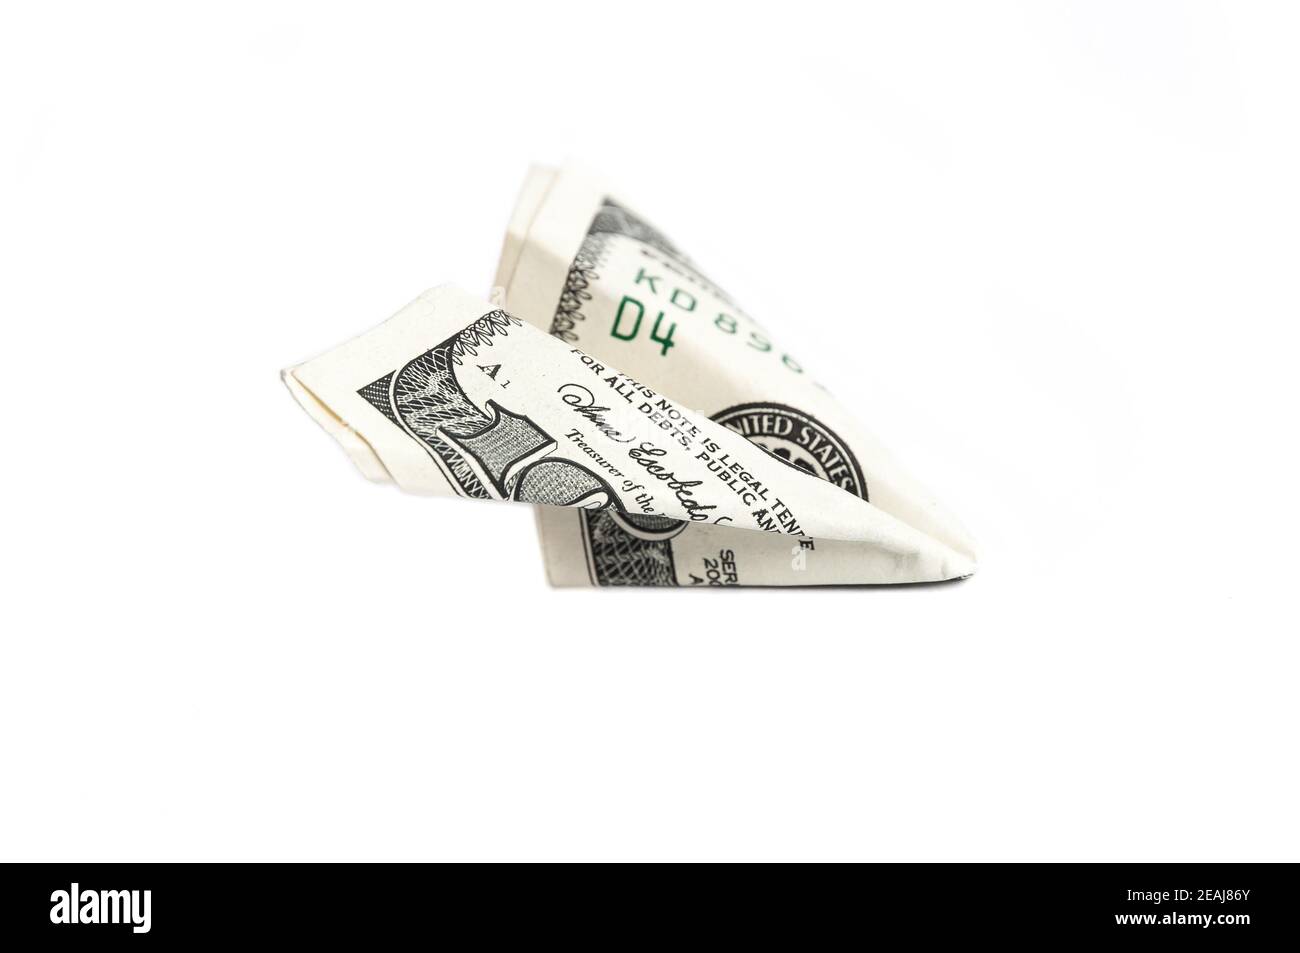 A paper airplane made from a bill of one hundred dollars. Stock Photo